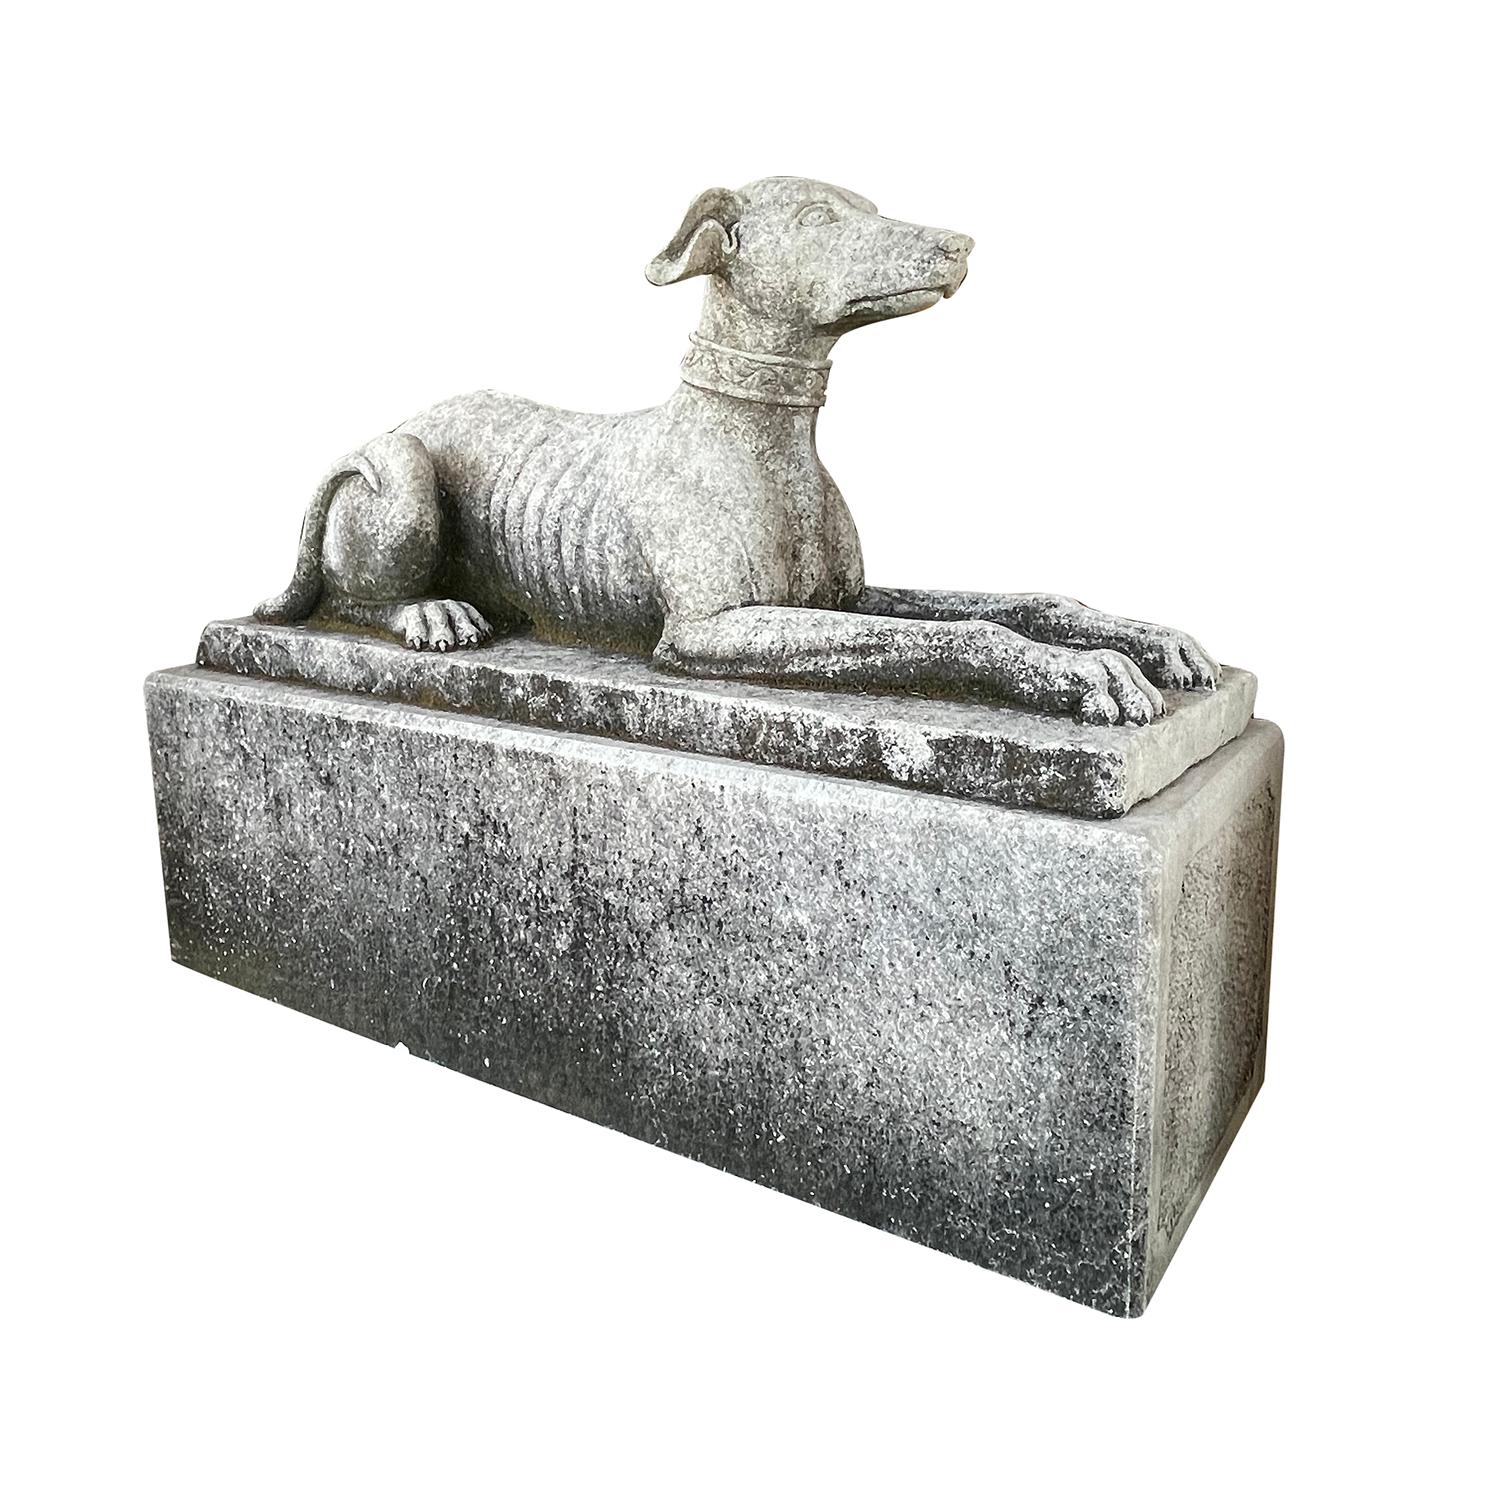 20th Century British Vintage Pair of Whippet Garden Limestone Statues In Good Condition For Sale In West Palm Beach, FL